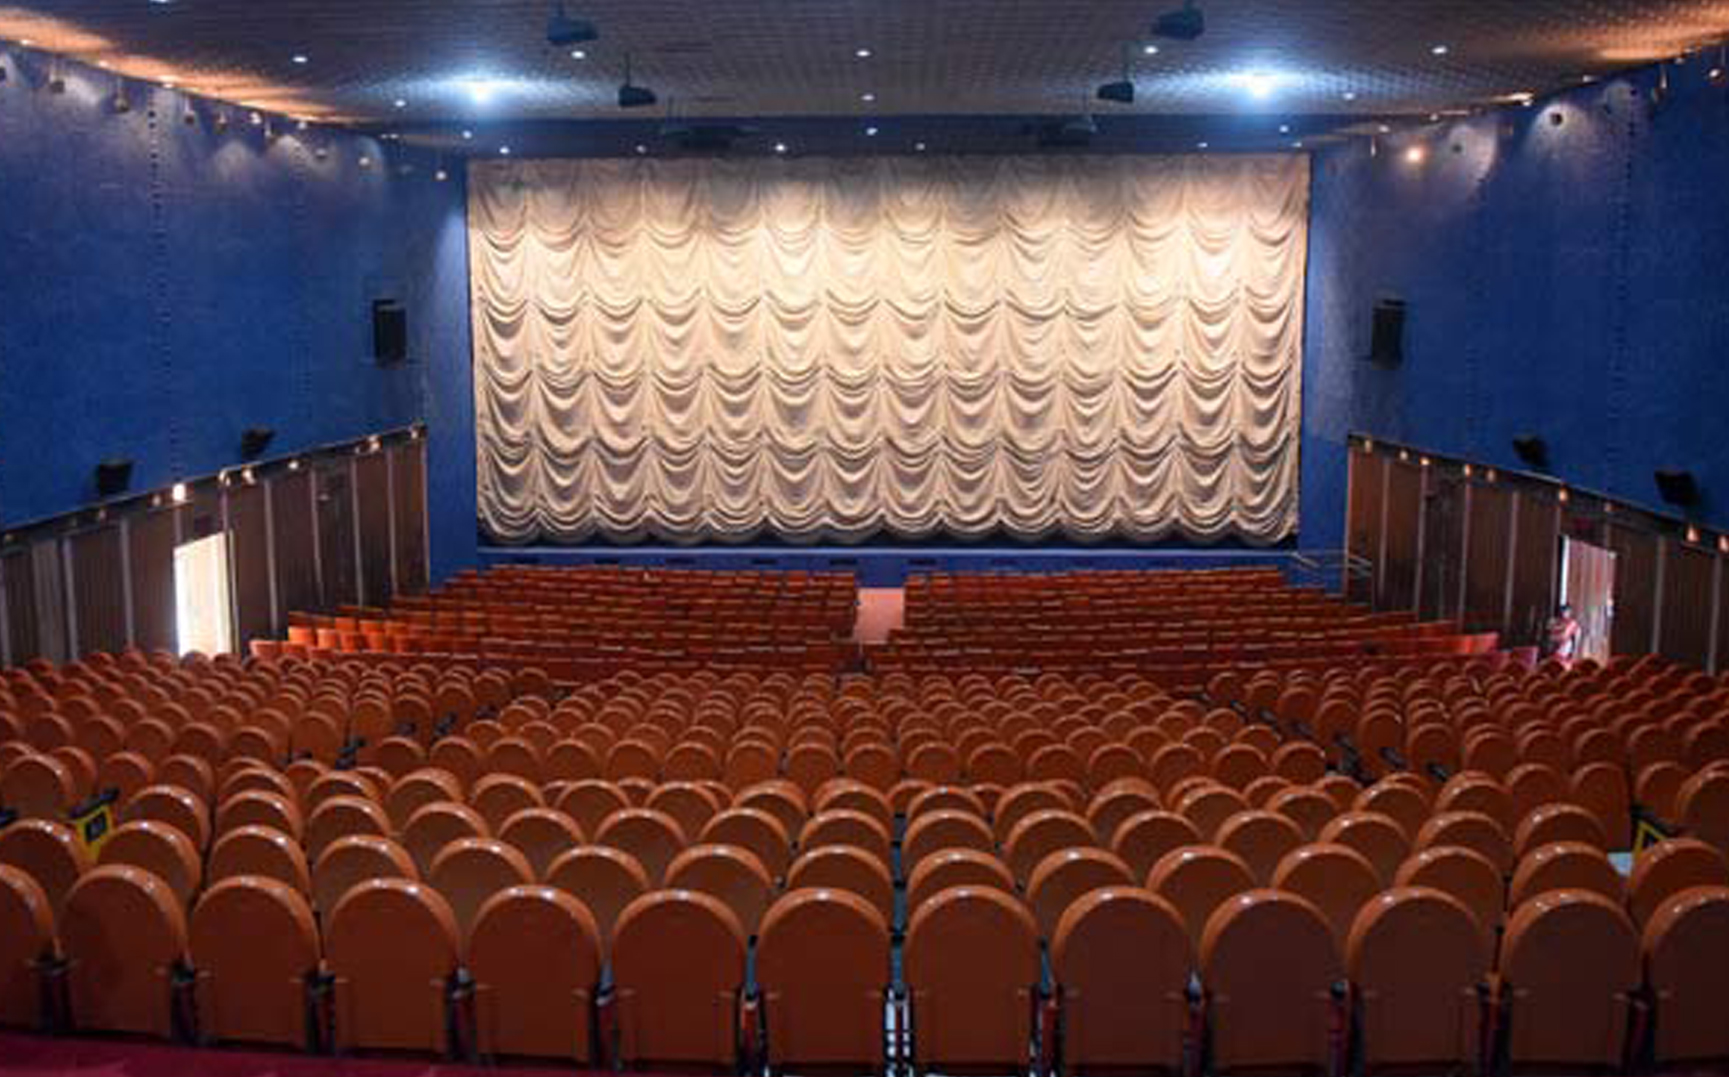 When would theatres screen cinemas?